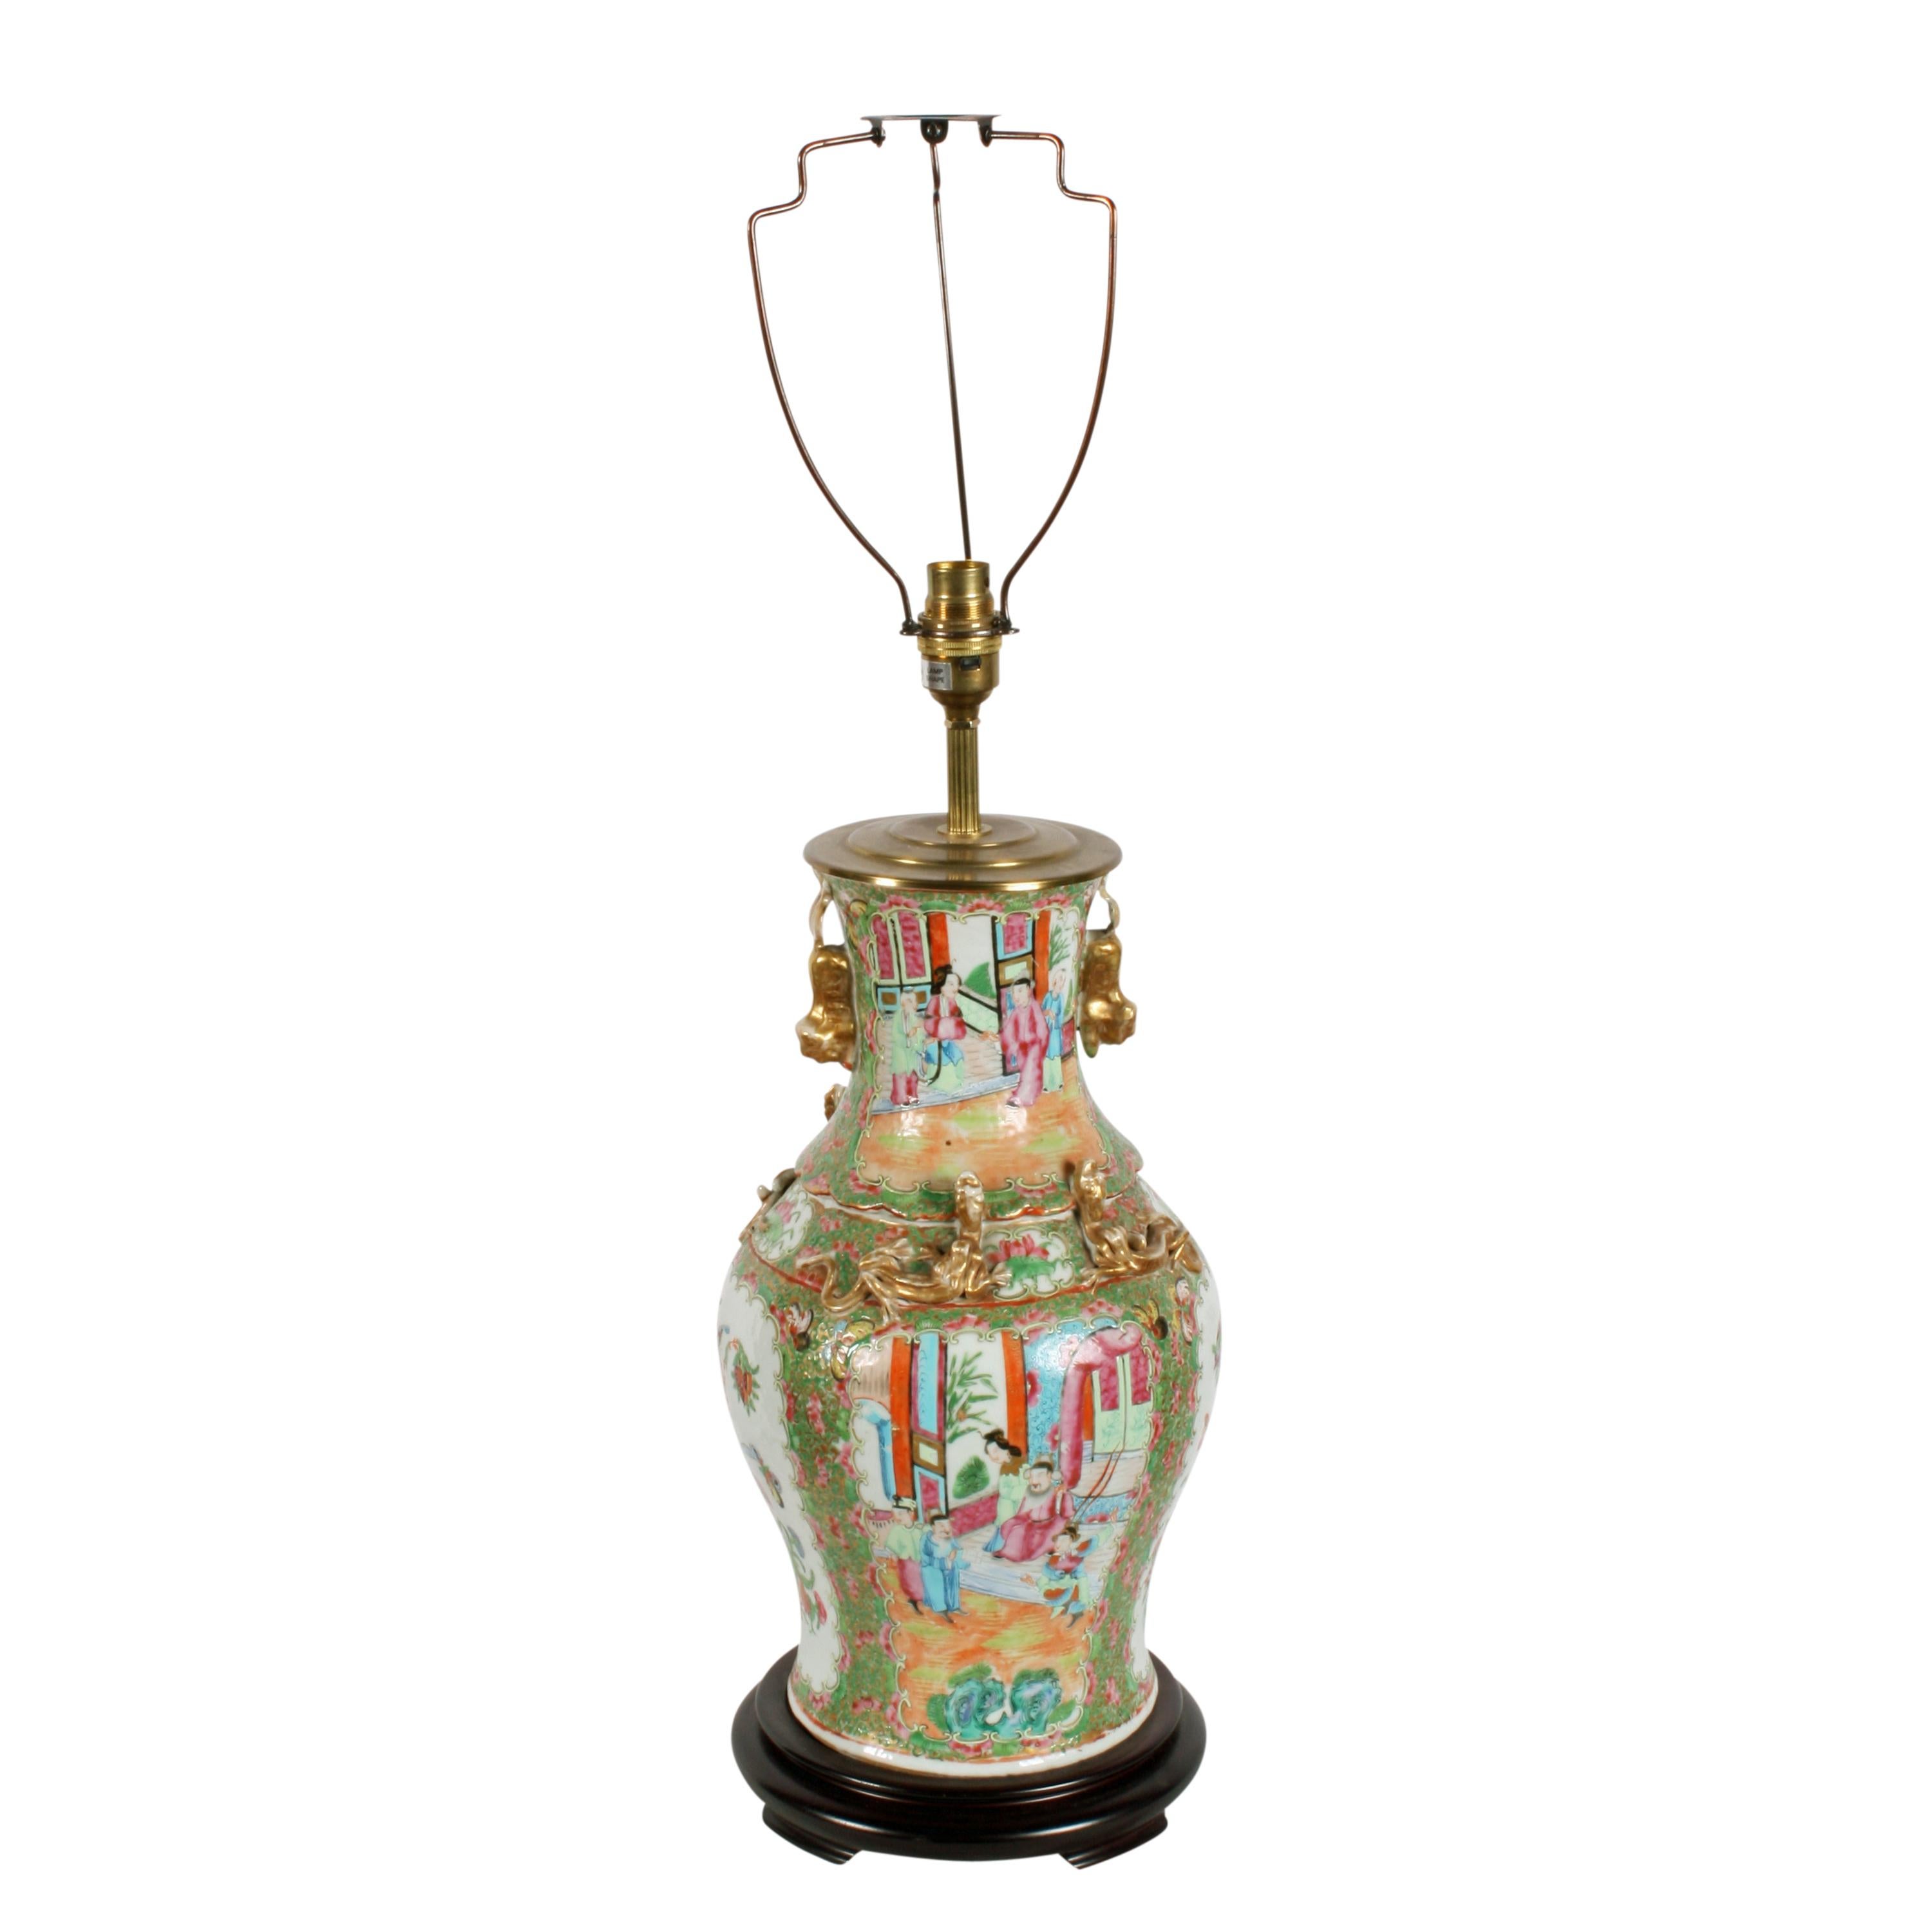 Late 19th century Chinese Canton Porcelain vase converted into a table lamp.


The lamp sits on a fitted turned wood low stand that has four shaped feet.


The porcelain vase is highly decorated with hand painted scenes within panels and